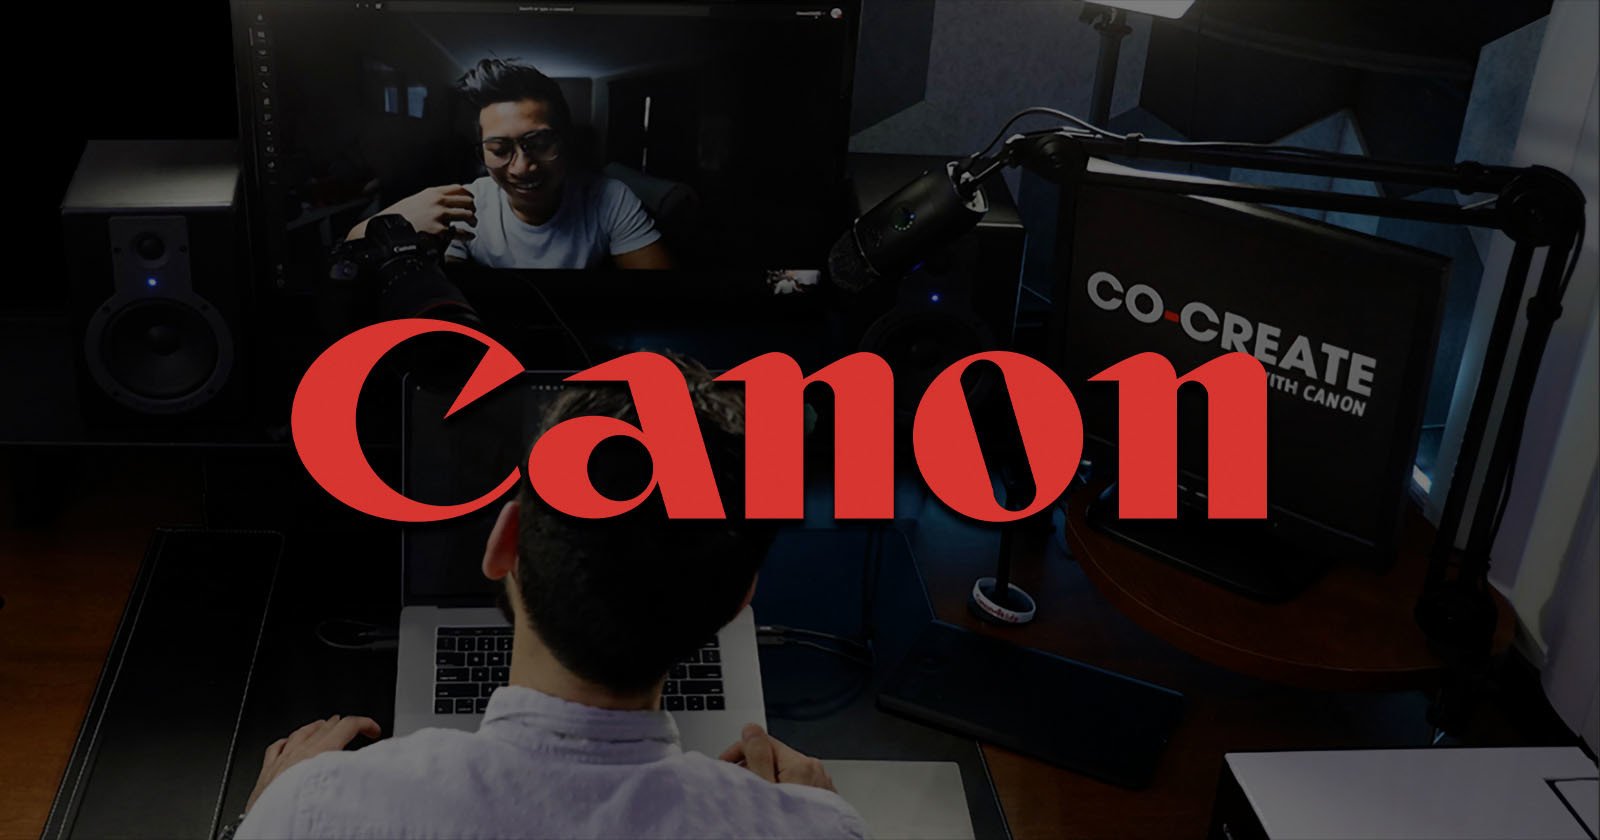  canon adds pro version webcam software costs 